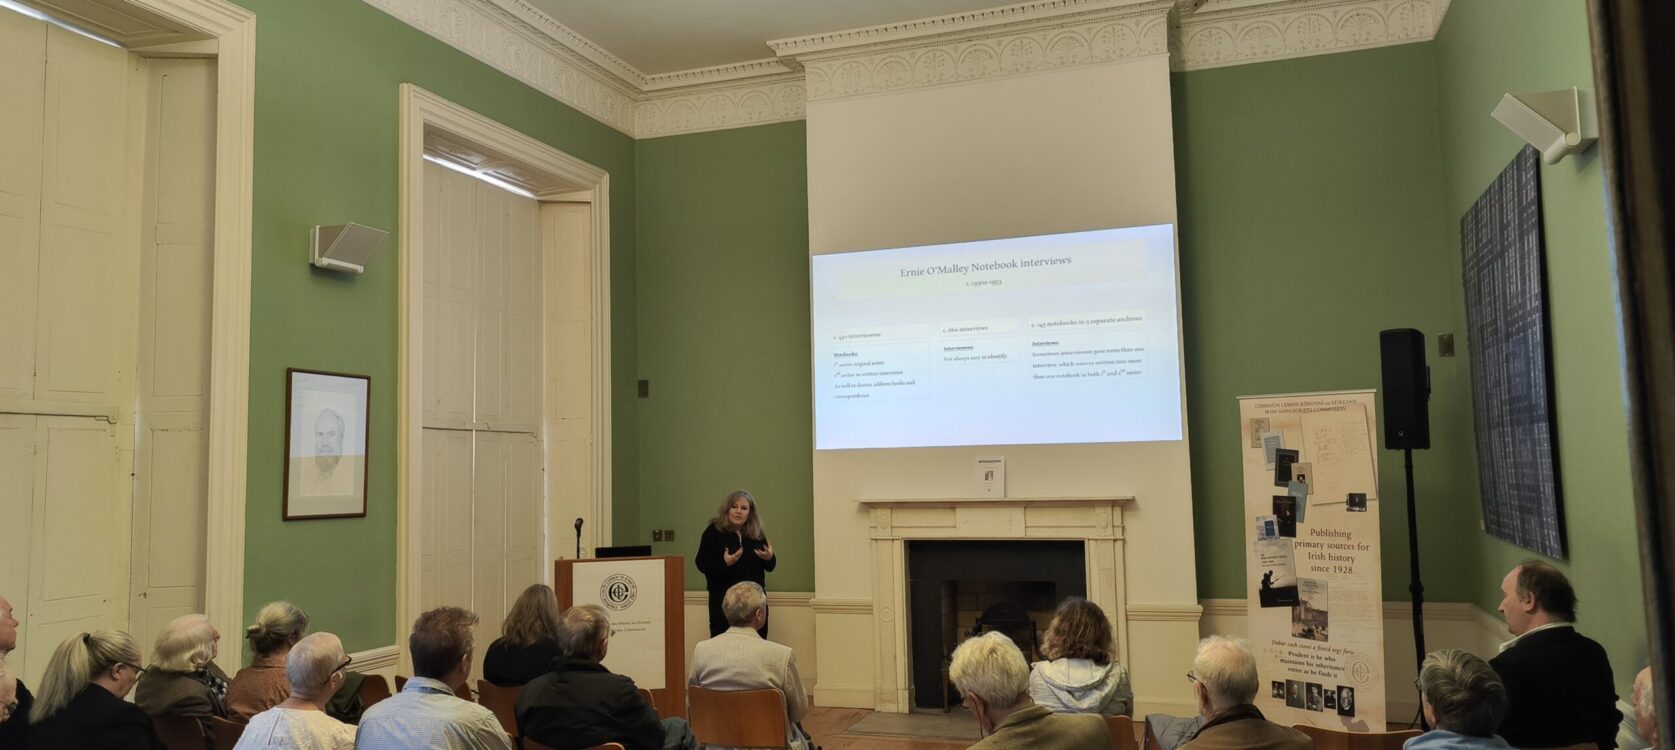 Dr Eve Morrison giving the lecture “Reading the Unreadable – Ernie O’Malley’s notebooks” at 45 Merrion Square